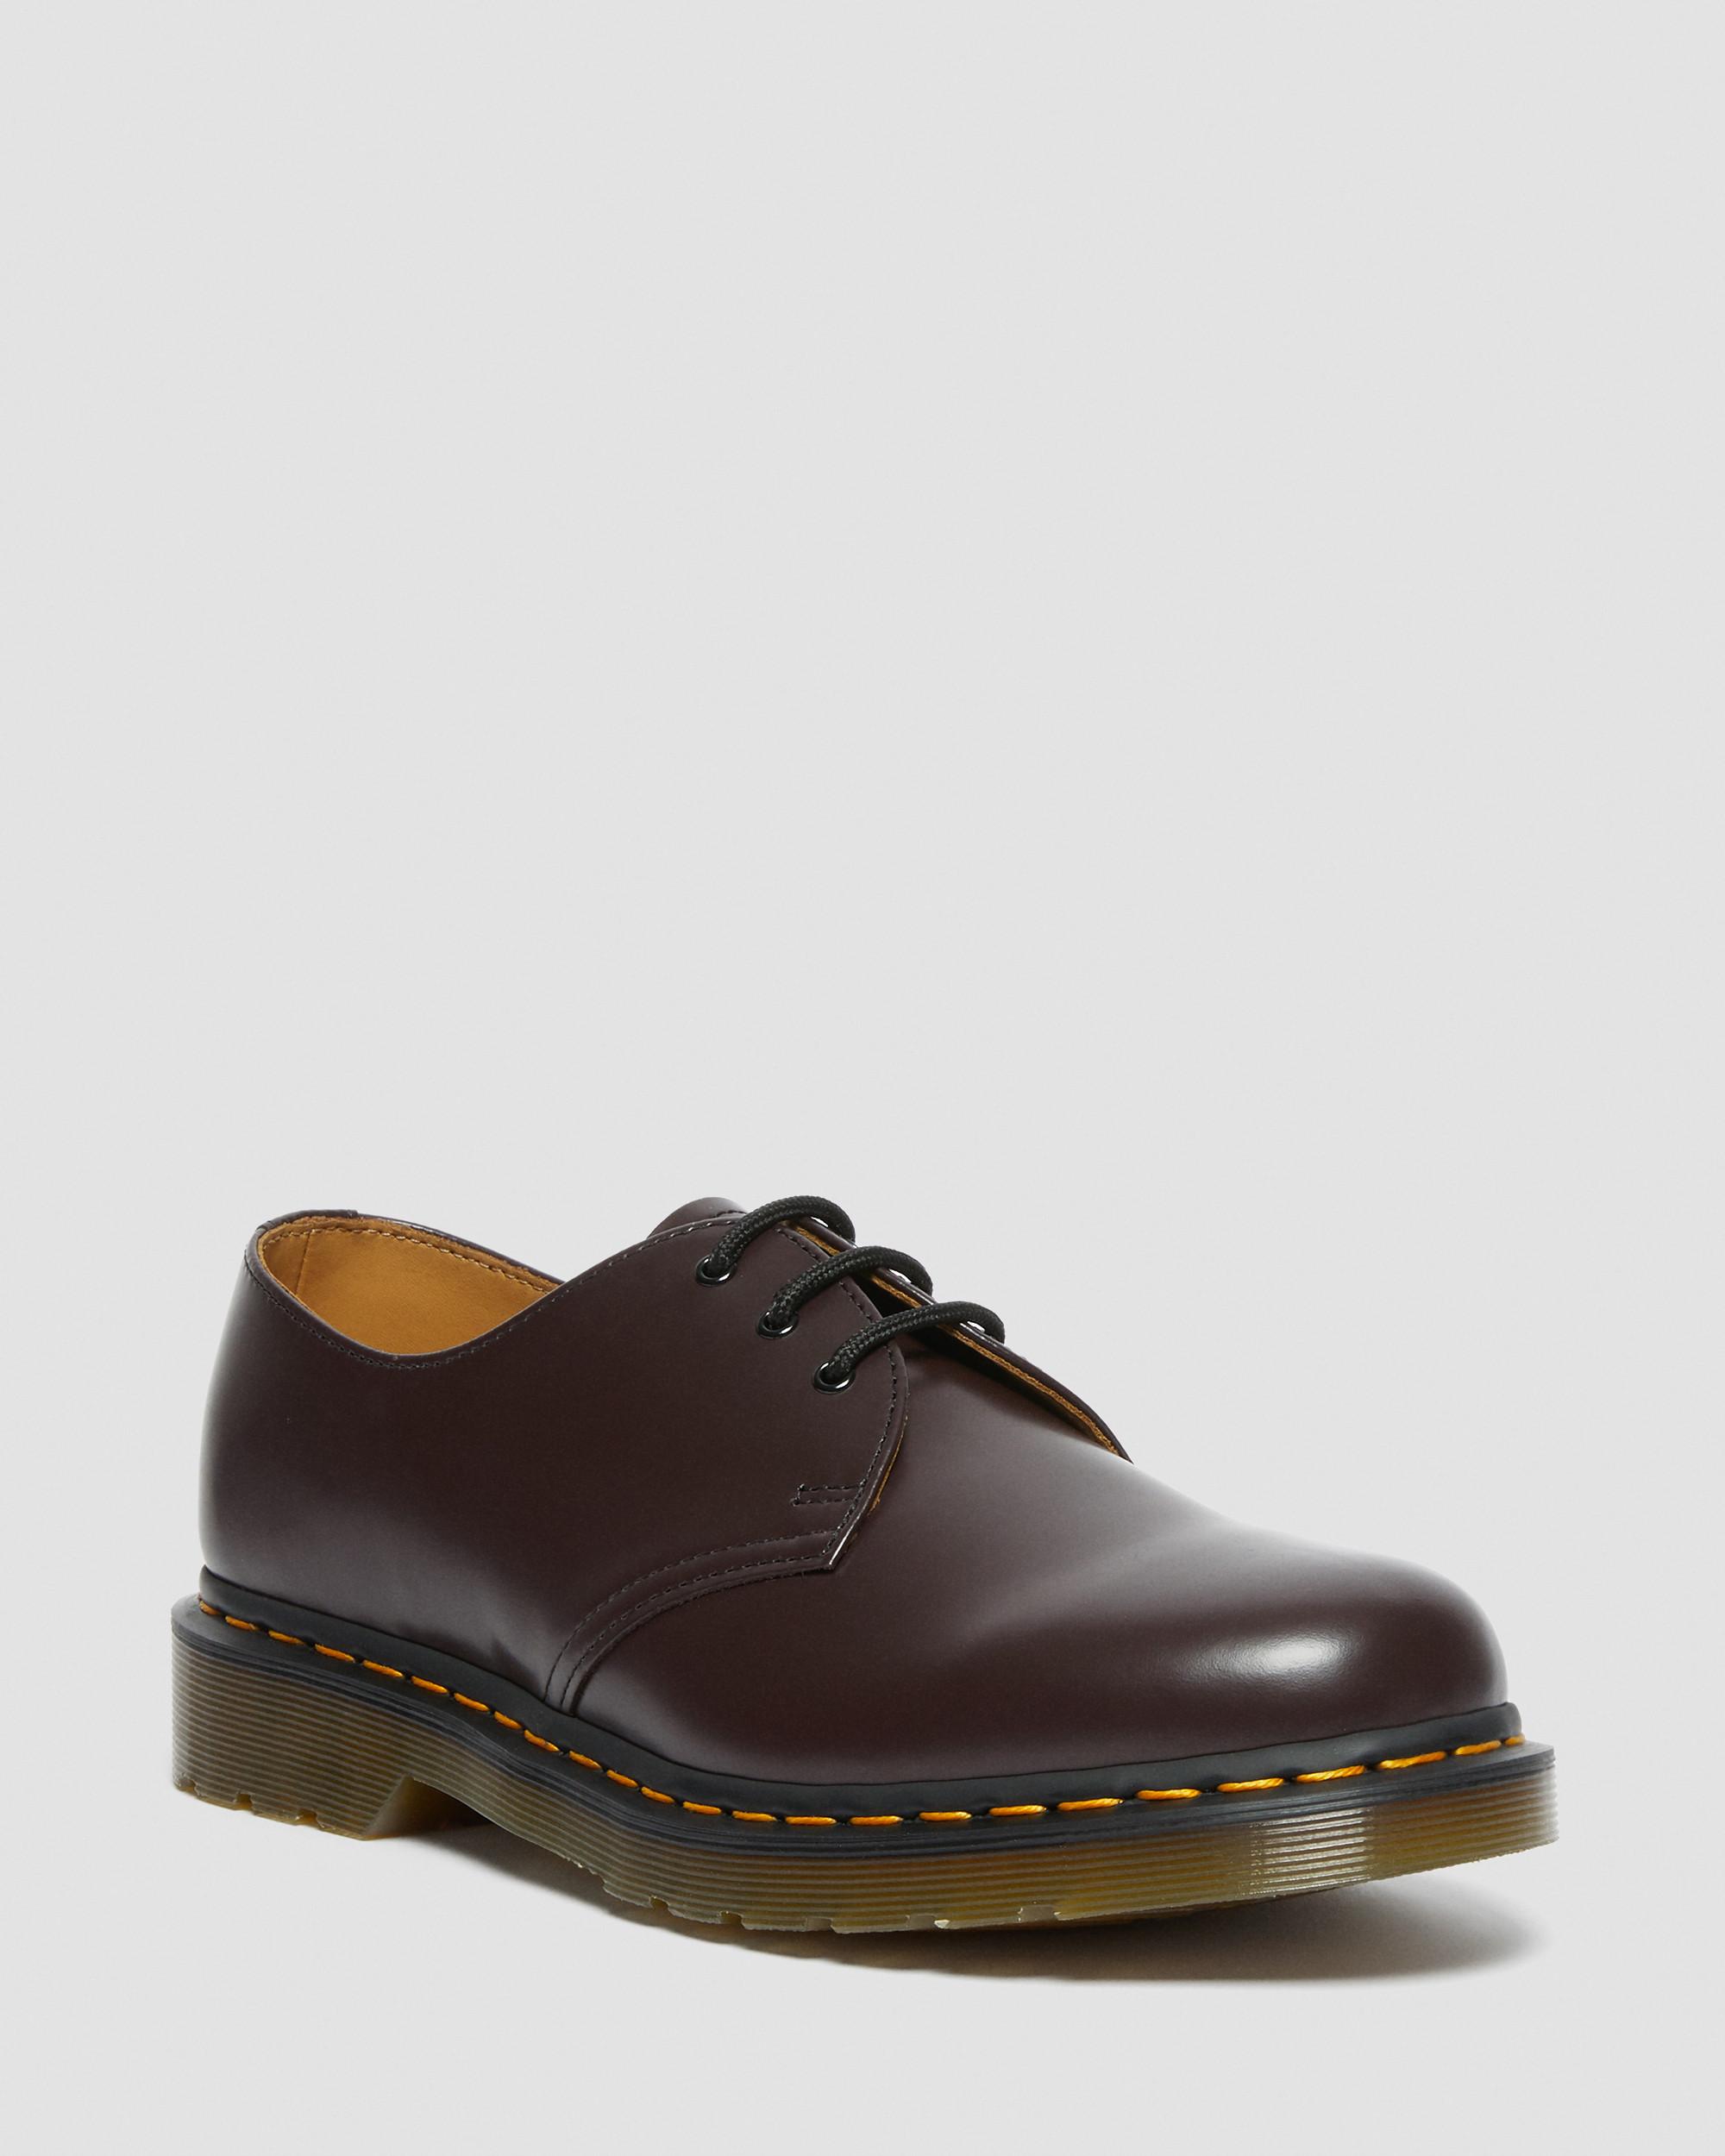 1461 Smooth Leather Oxford Shoes, Black | Dr. Martens